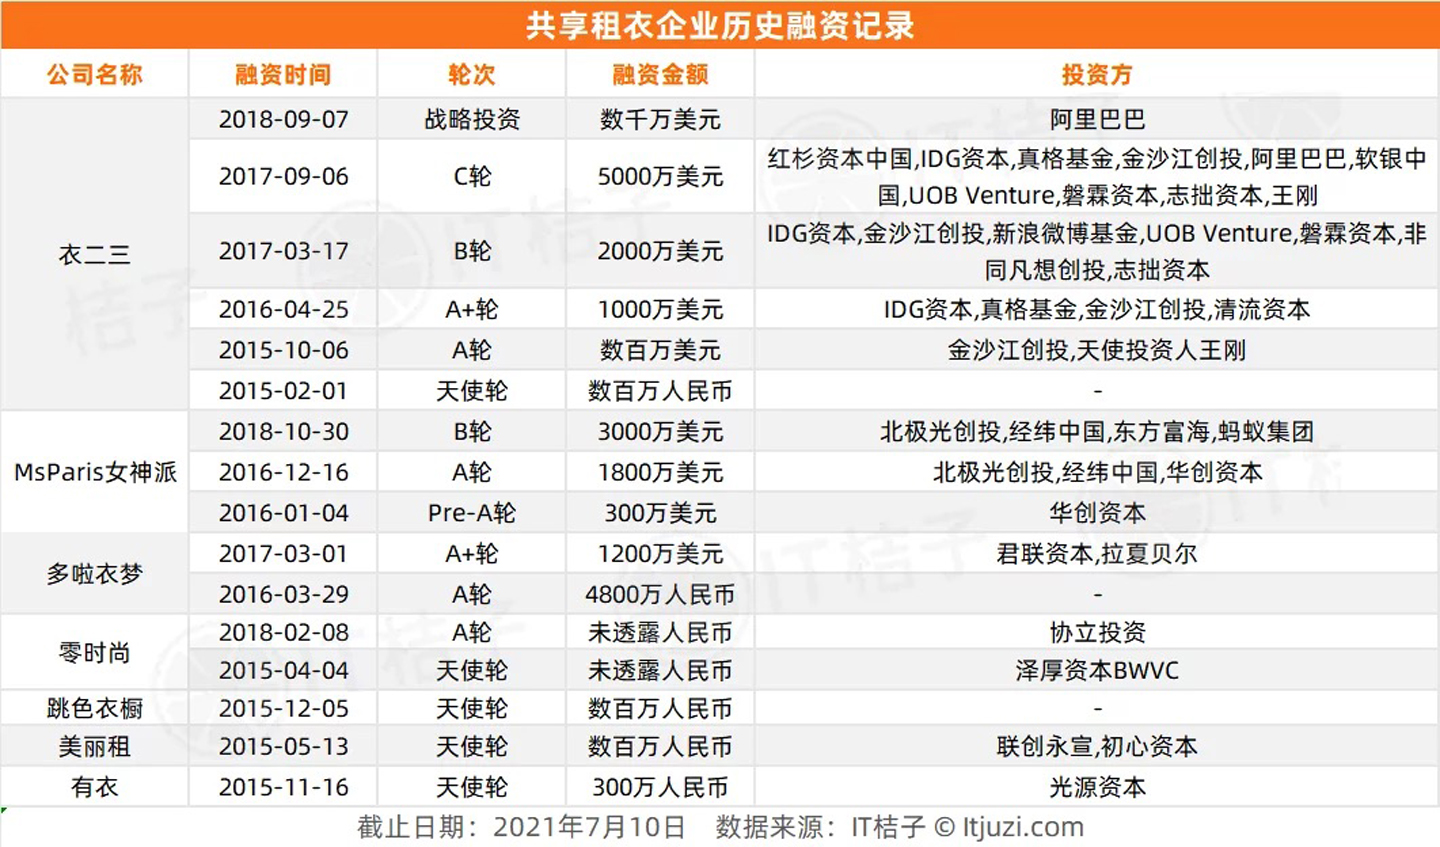 Data from itjuzi.com. Sharing the historical financing records of shared clothing rental enterprises: YCloset completed 6 rounds of financing, with a total financing amount of about 738 million yuan